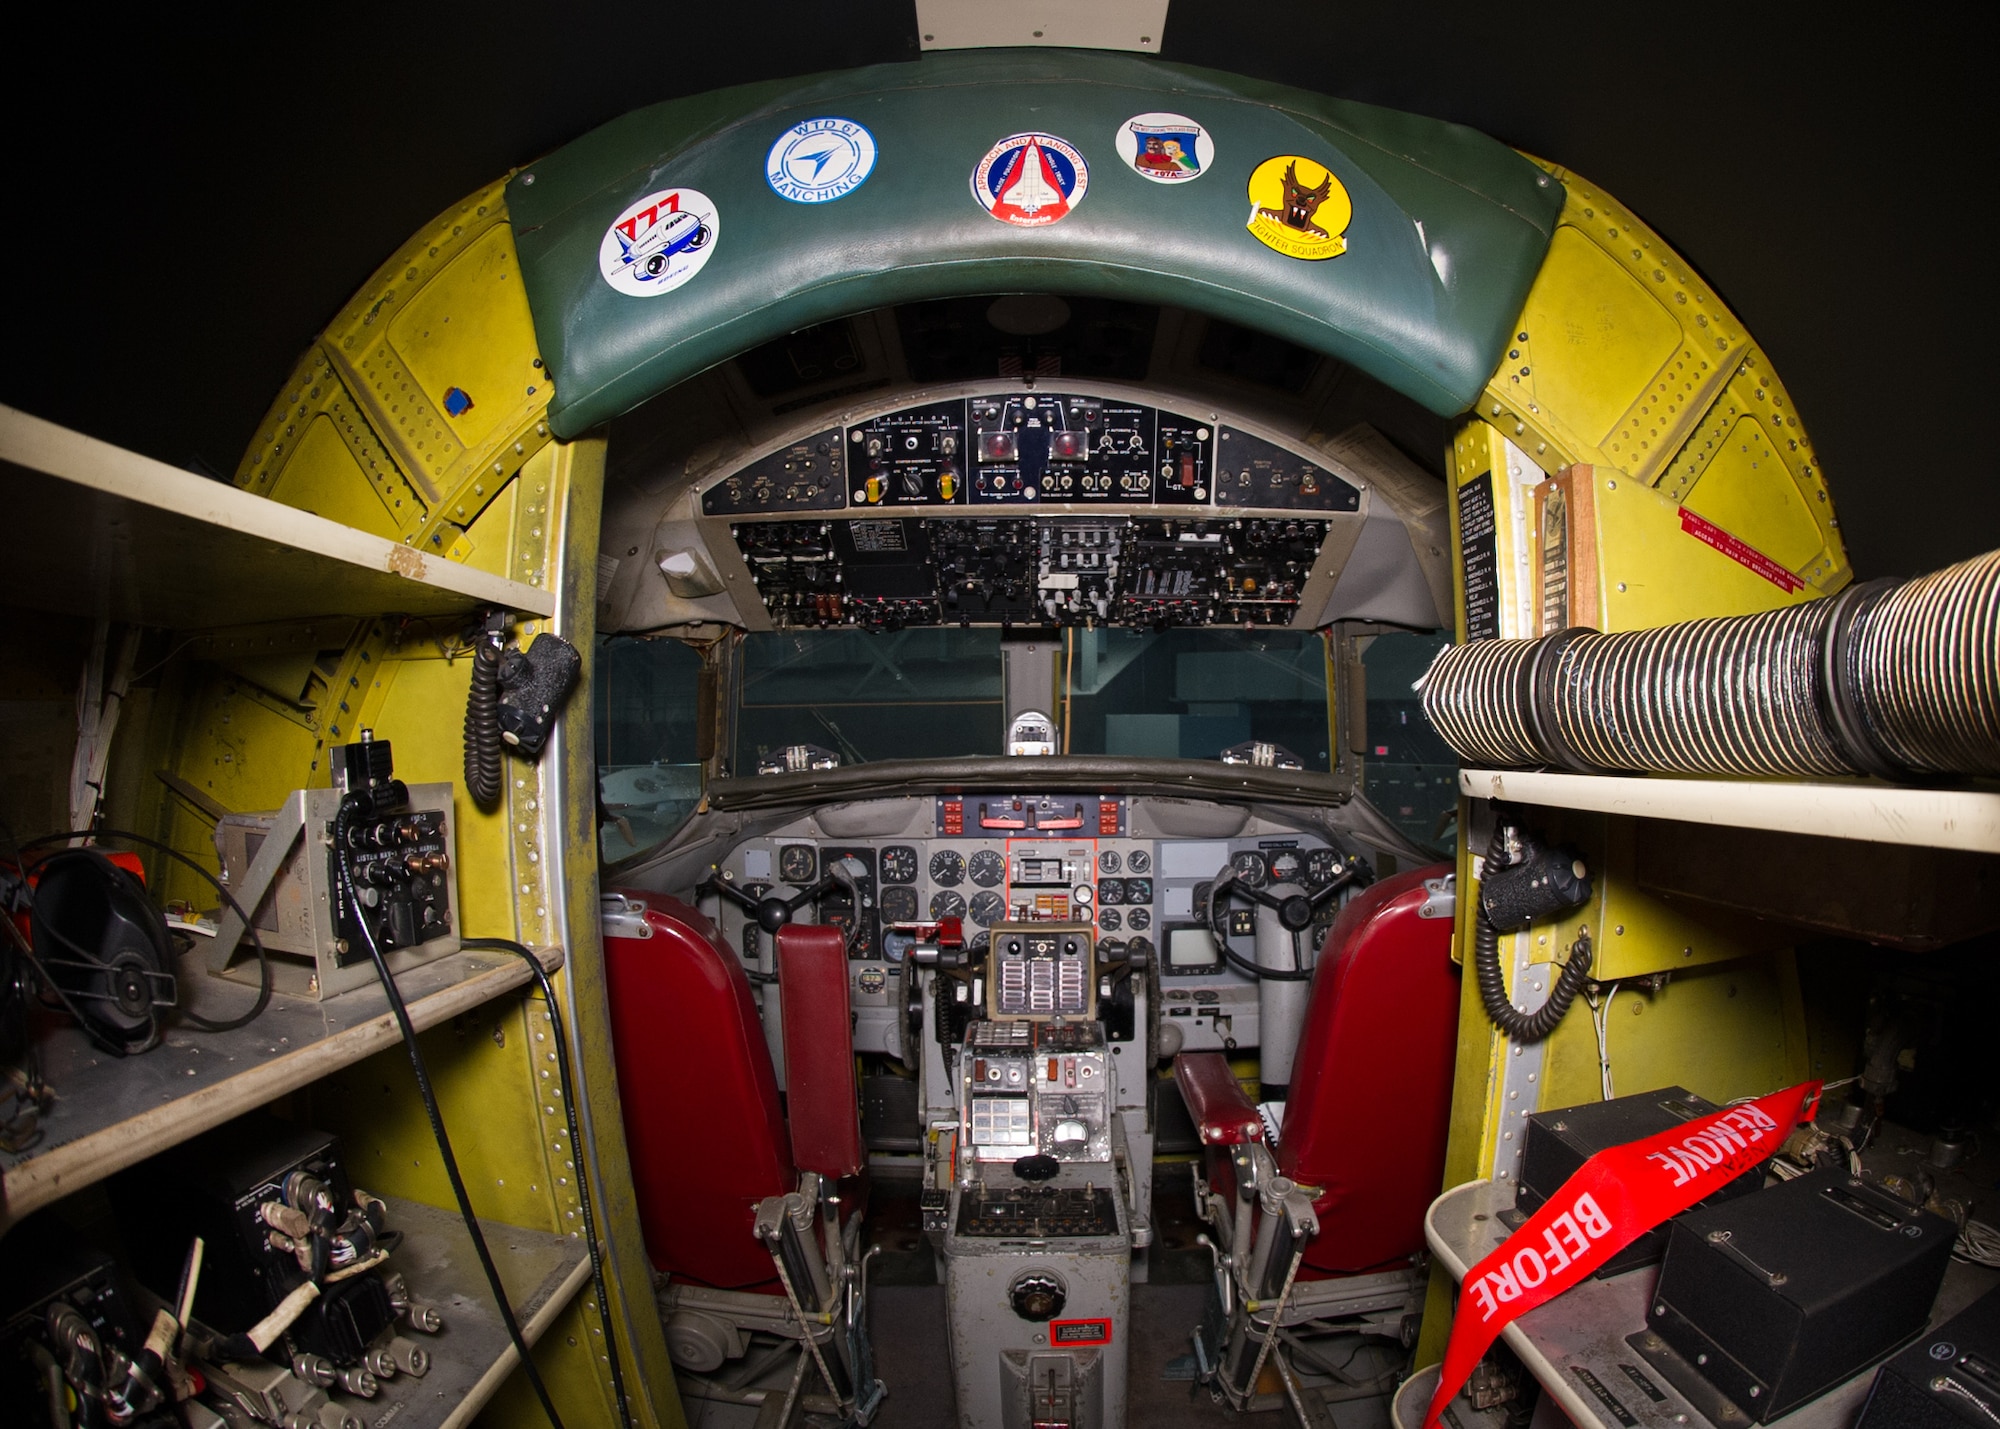 DAYTON, Ohio -- Convair NC-131H Total In-Flight Simulator (TIFS) cockpit view in the Research & Development Gallery at the National Museum of the United States Air Force. (U.S. Air Force photo by Ken LaRock)
